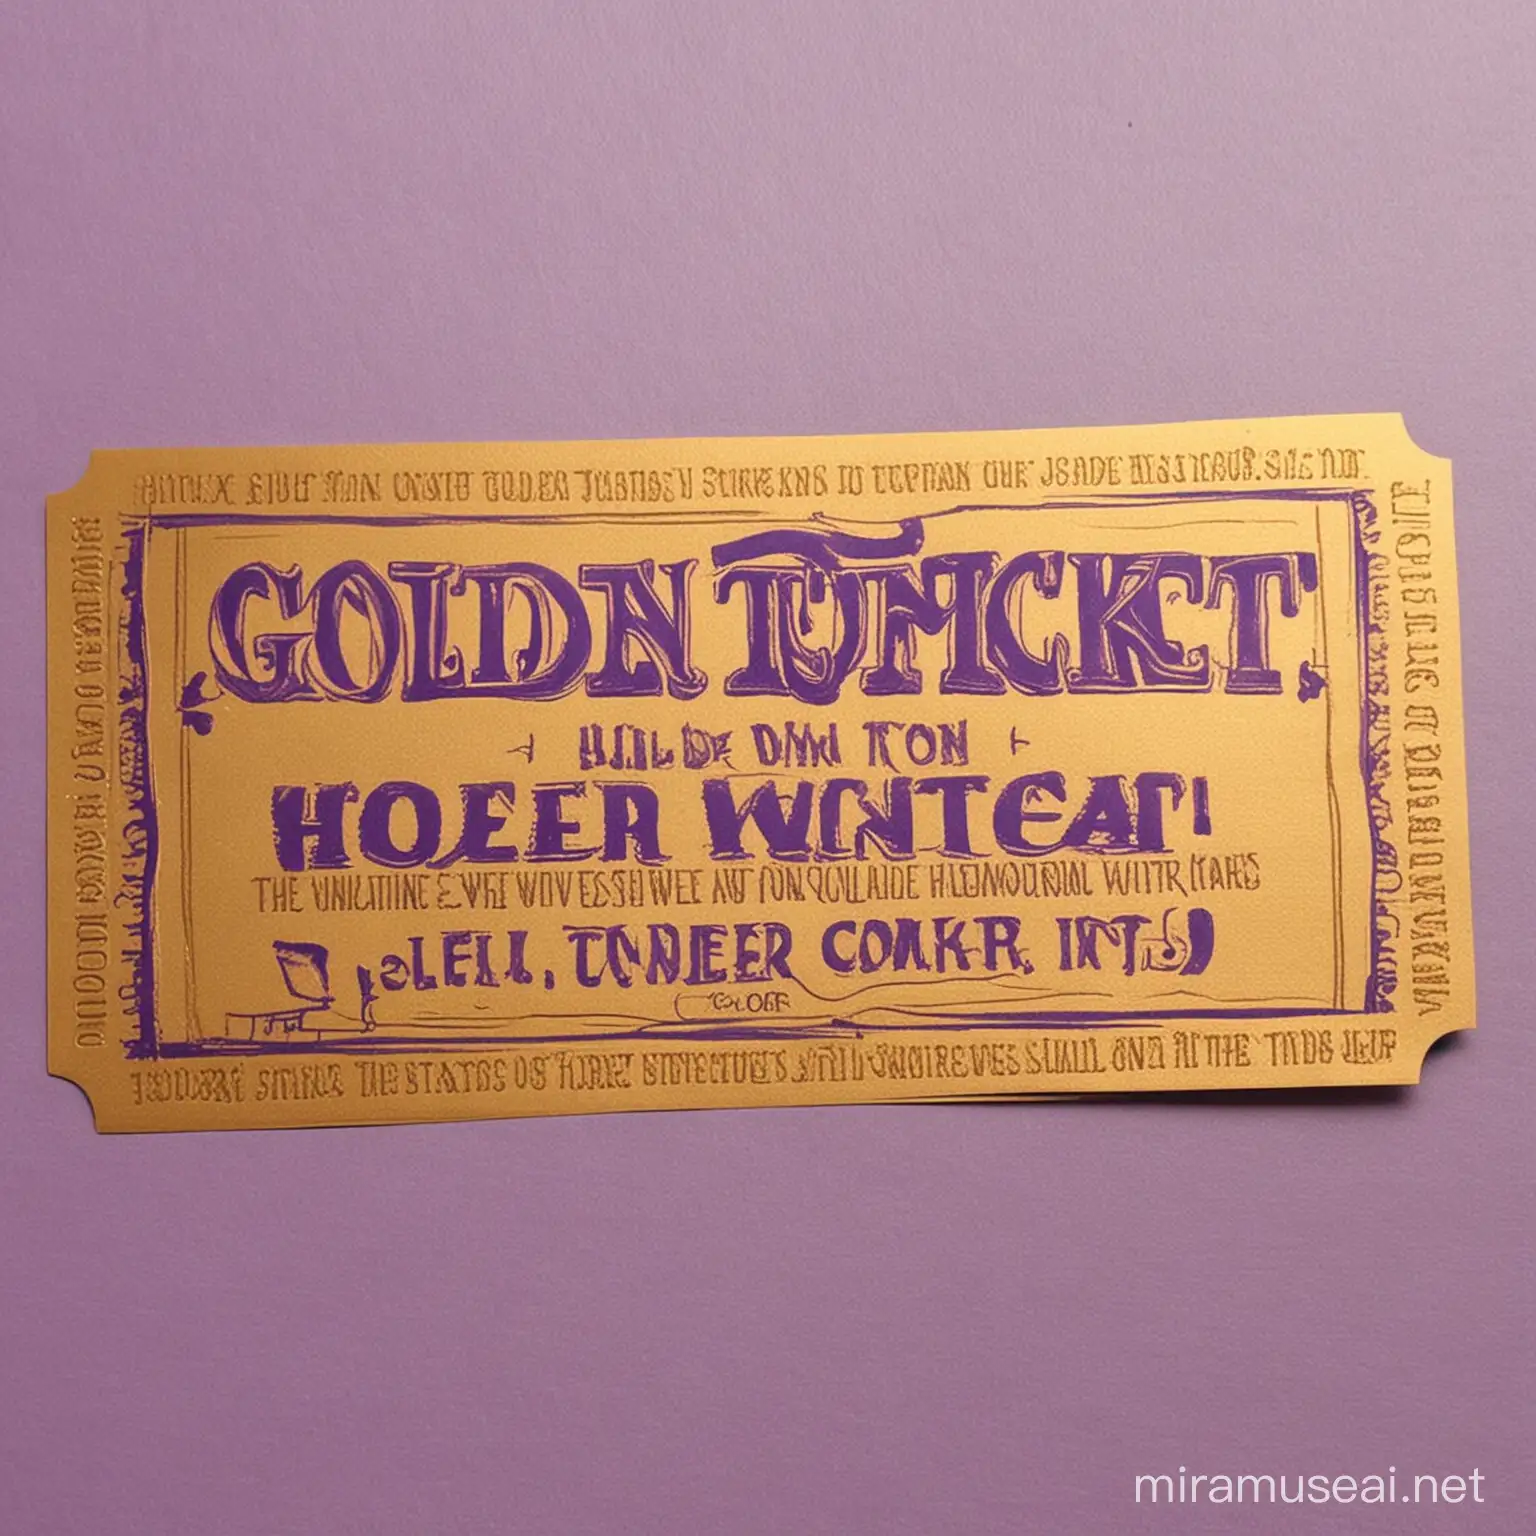 Golden Ticket Surrounded by Lavish Gold